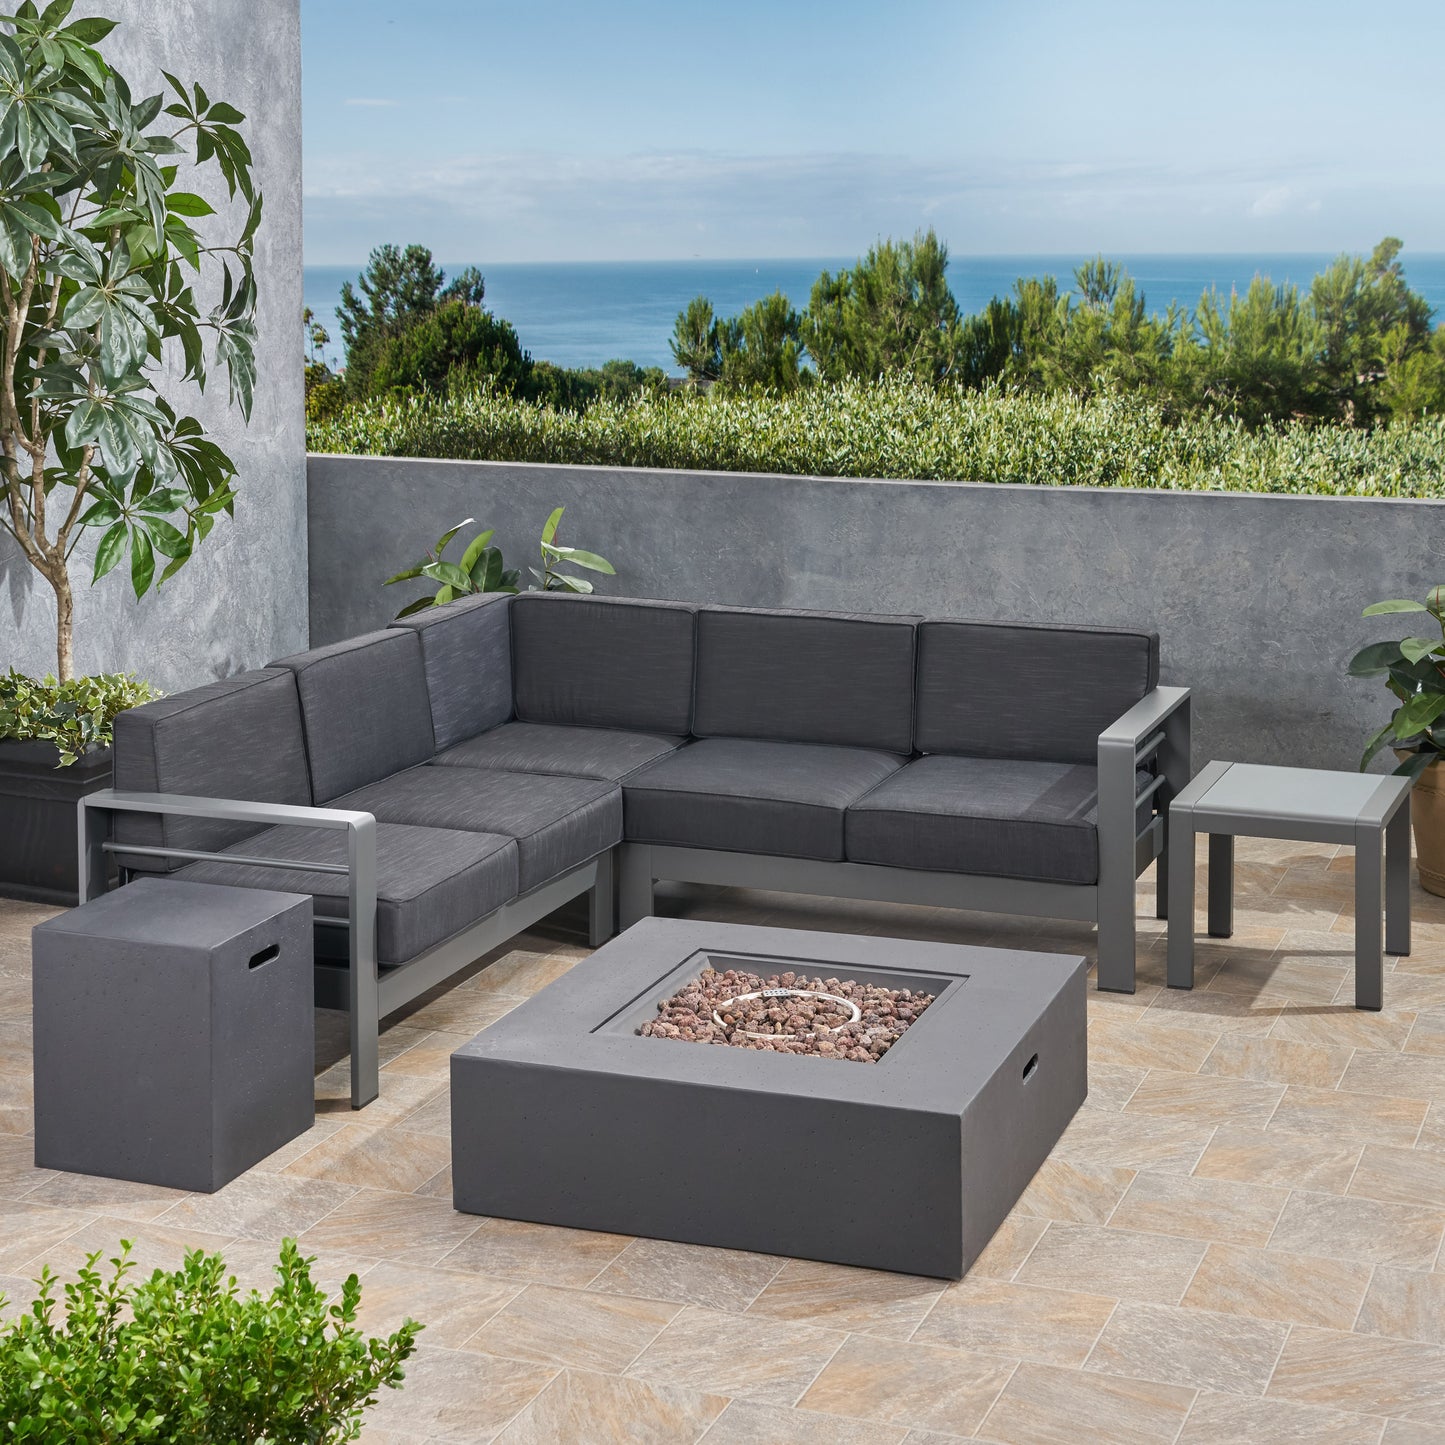 Scalett Outdoor 5 Seater Aluminum Chat Set with Fire Pit